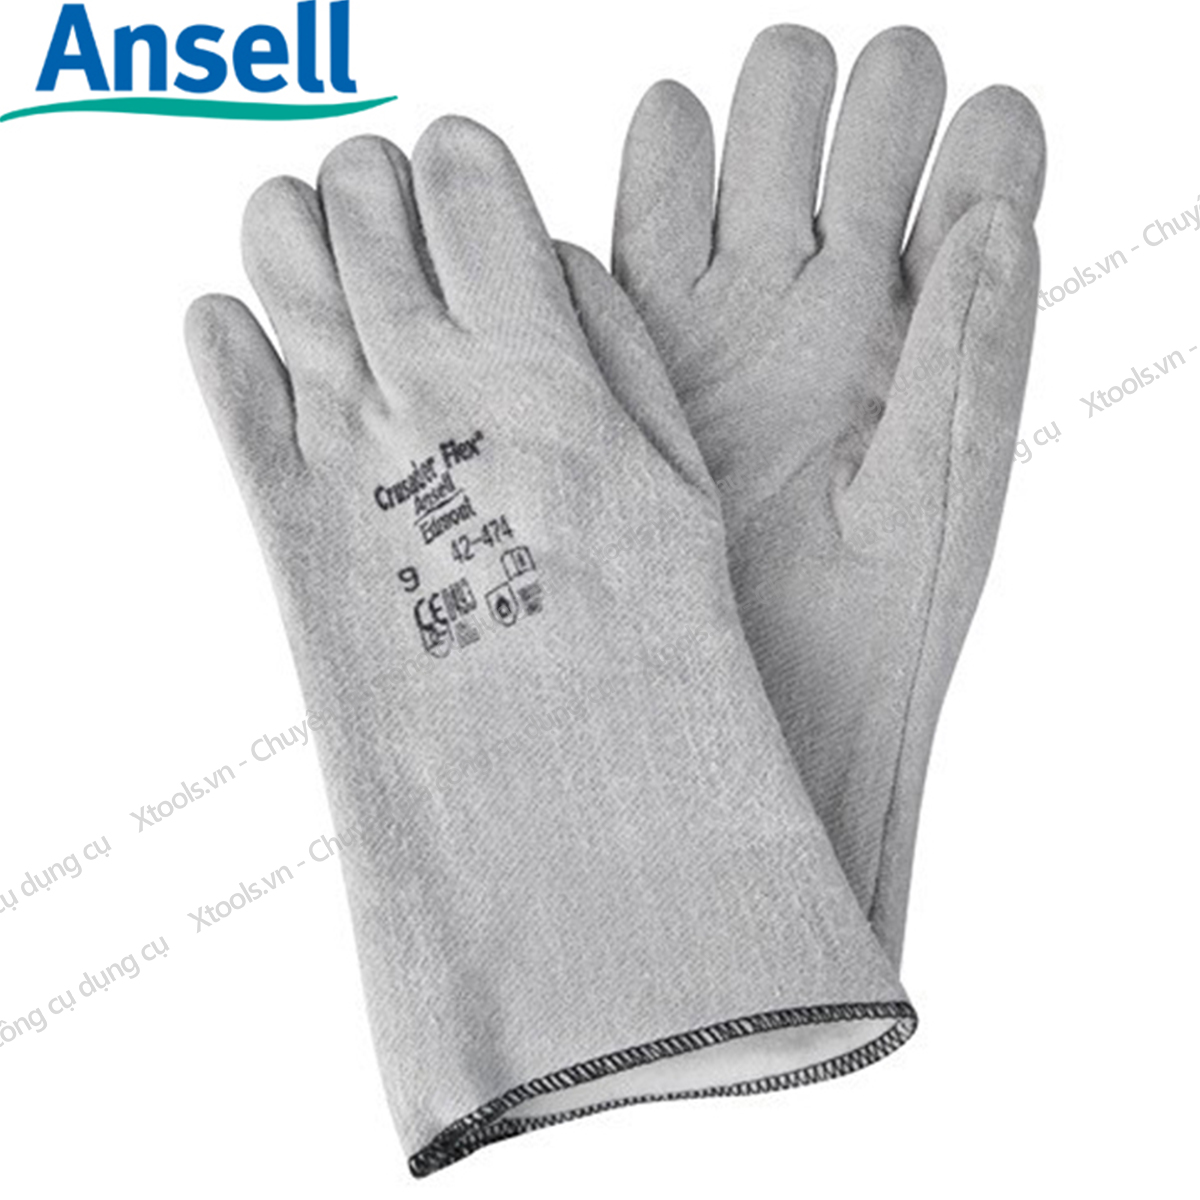 Heat resistant gloves Ansell 42-474